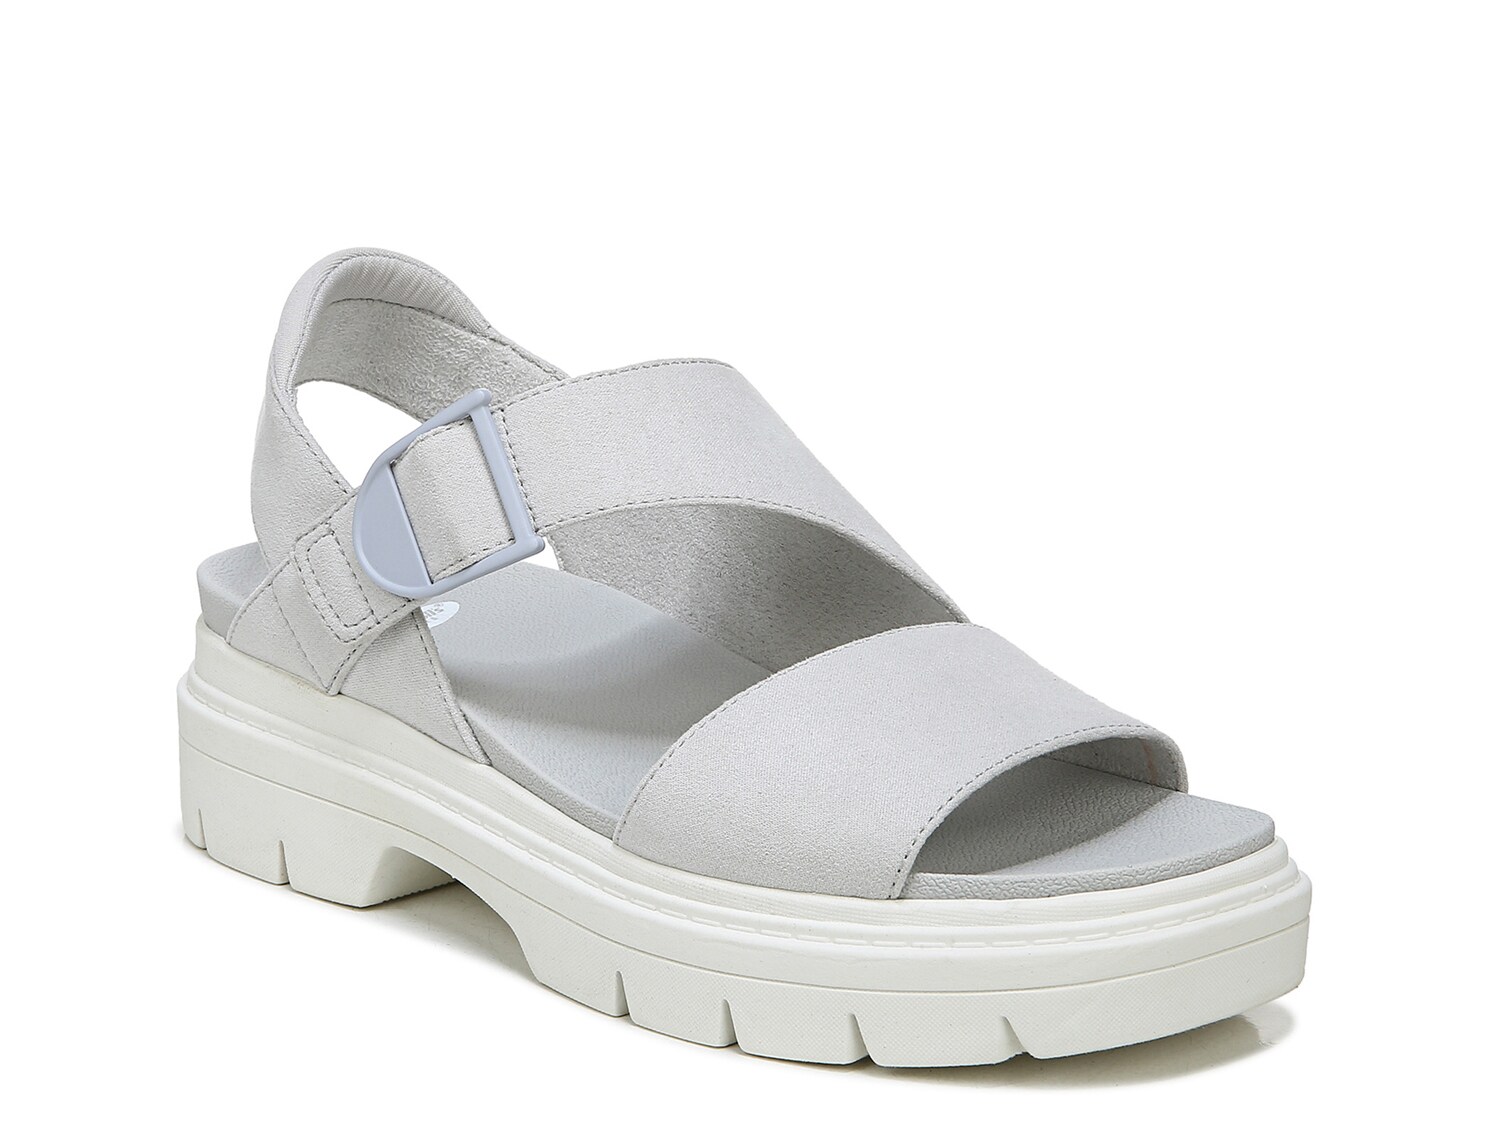 Dr. Scholl's Take Off Sport Sandal - Free Shipping | DSW